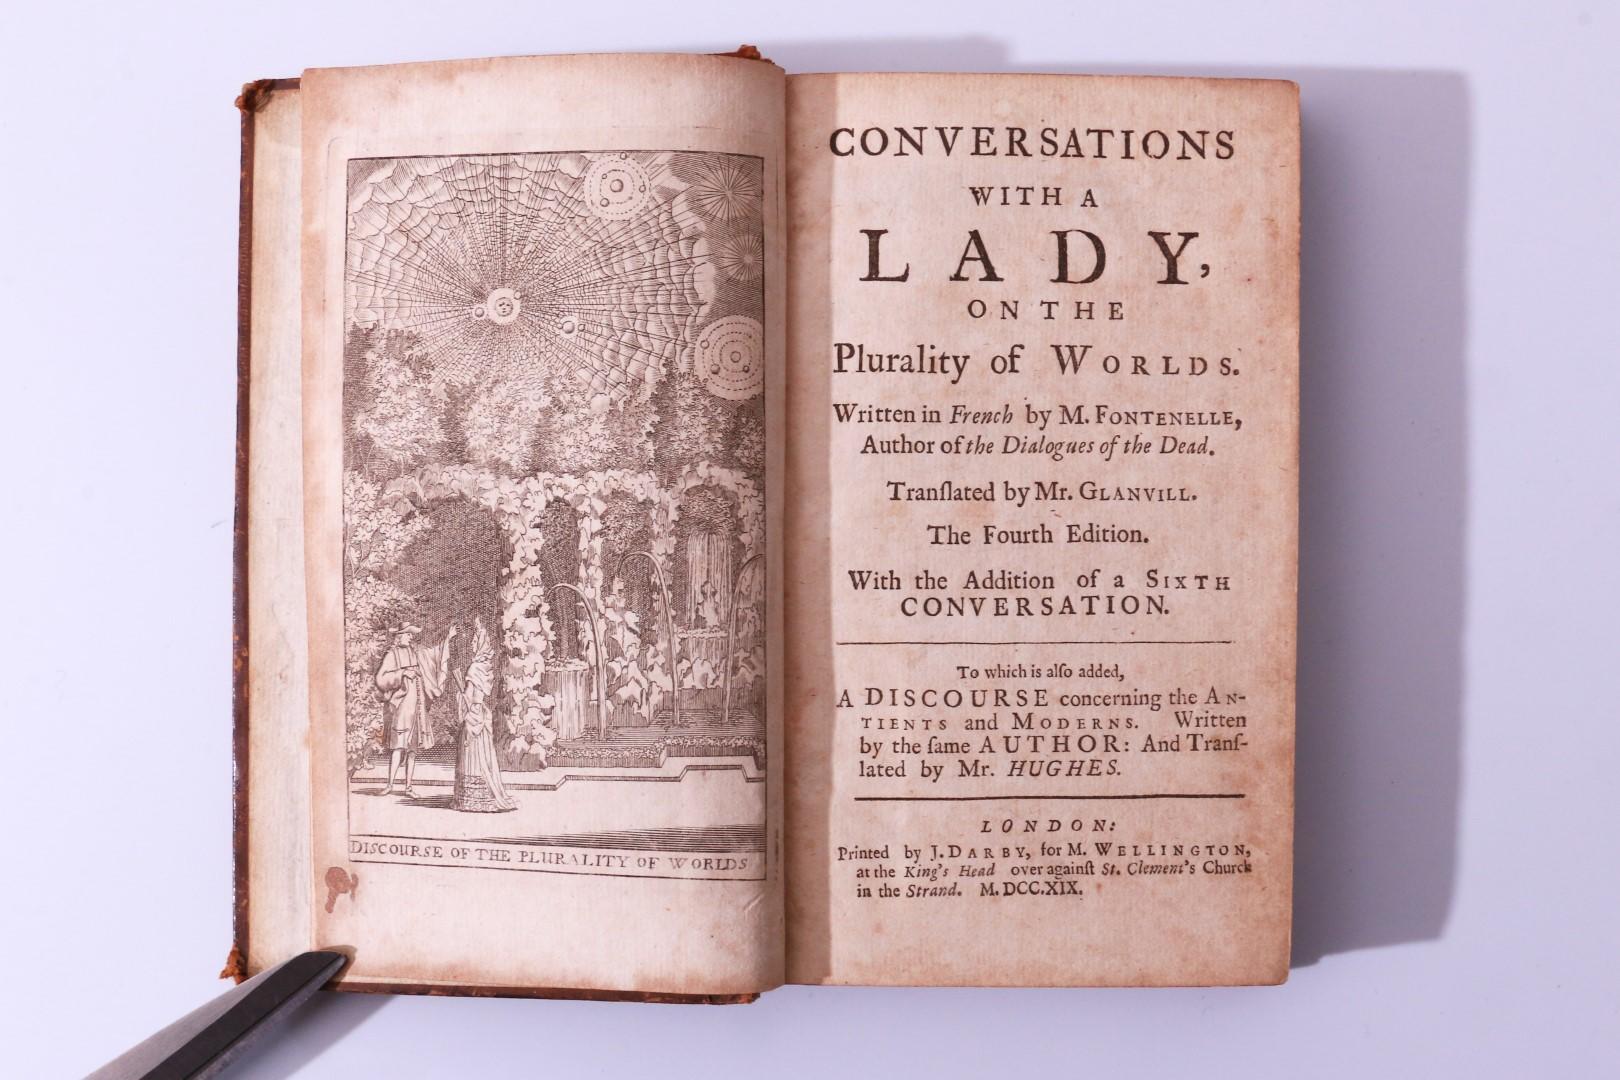 Bernard Le Bovier de Fontenelle - Conversations with a Lady on the Plurality of Worlds - J.Darby for M. Wellington, 1719, Fourth.